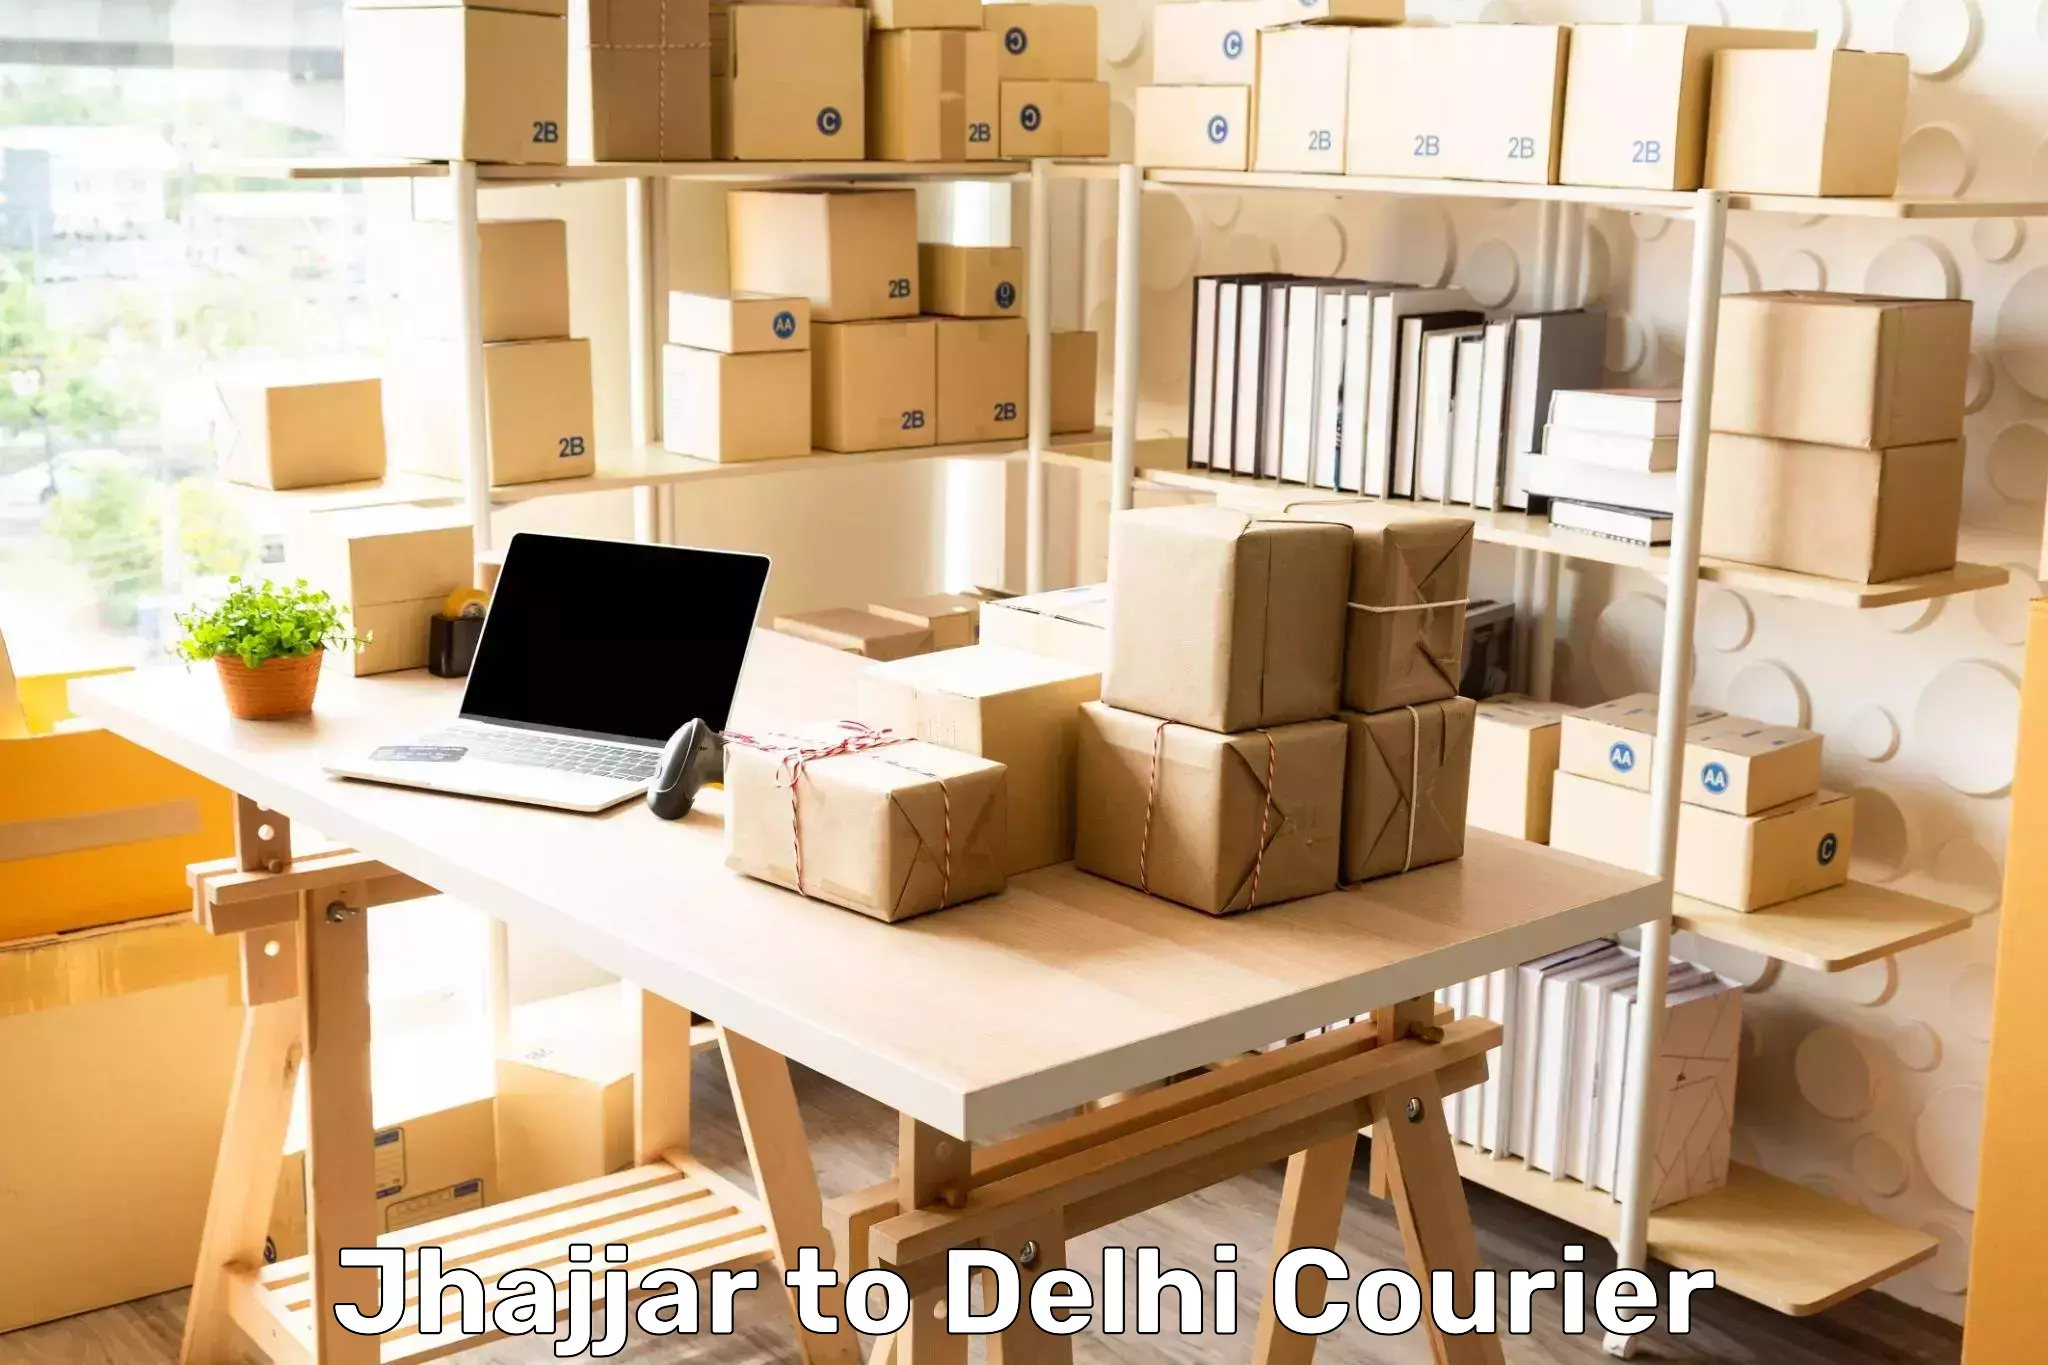 Business delivery service Jhajjar to Delhi